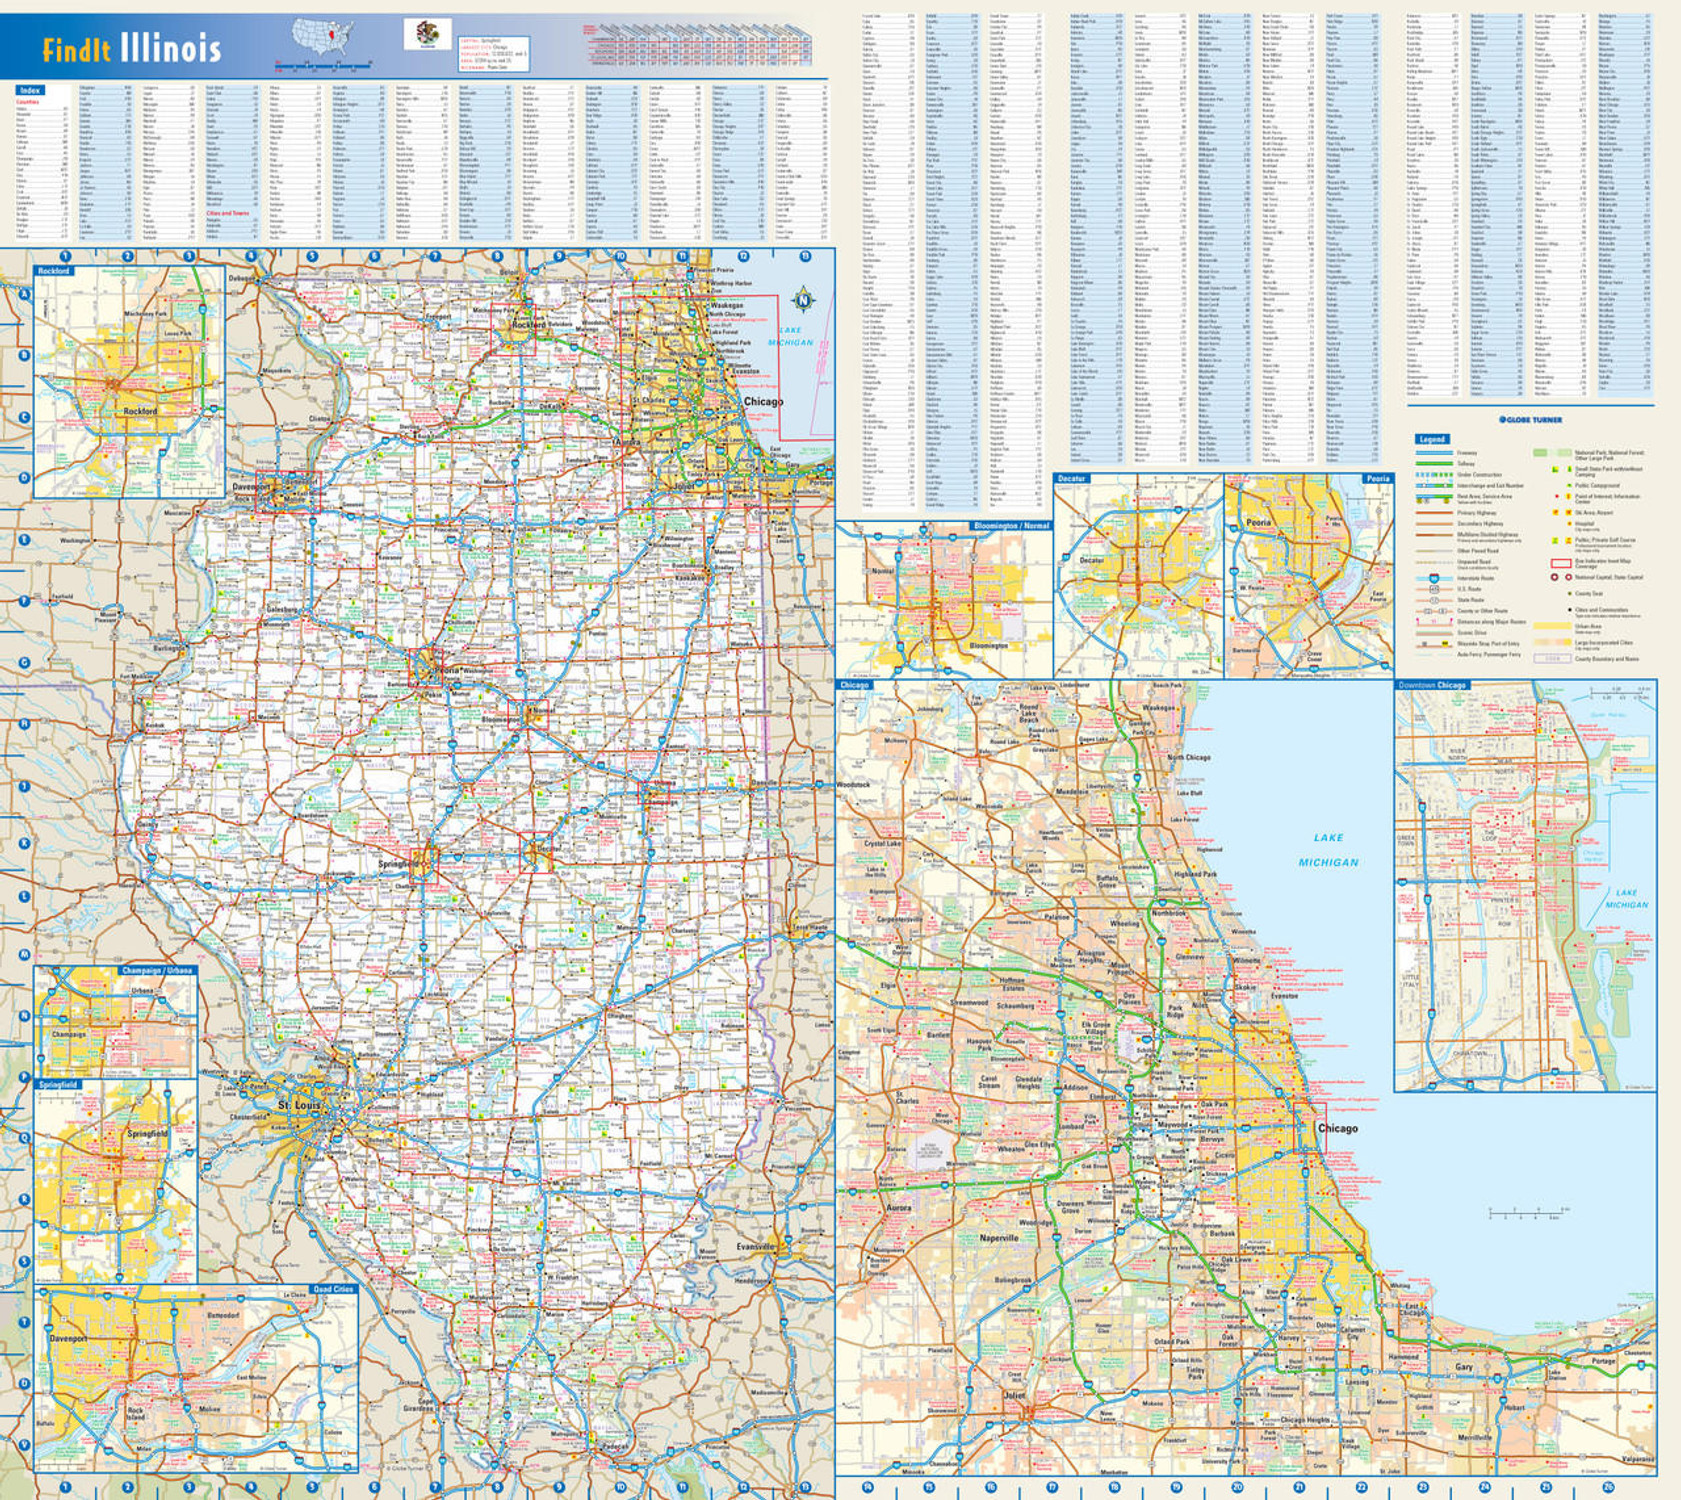 Illinois Reference Wall Map, image 1, World Maps Online